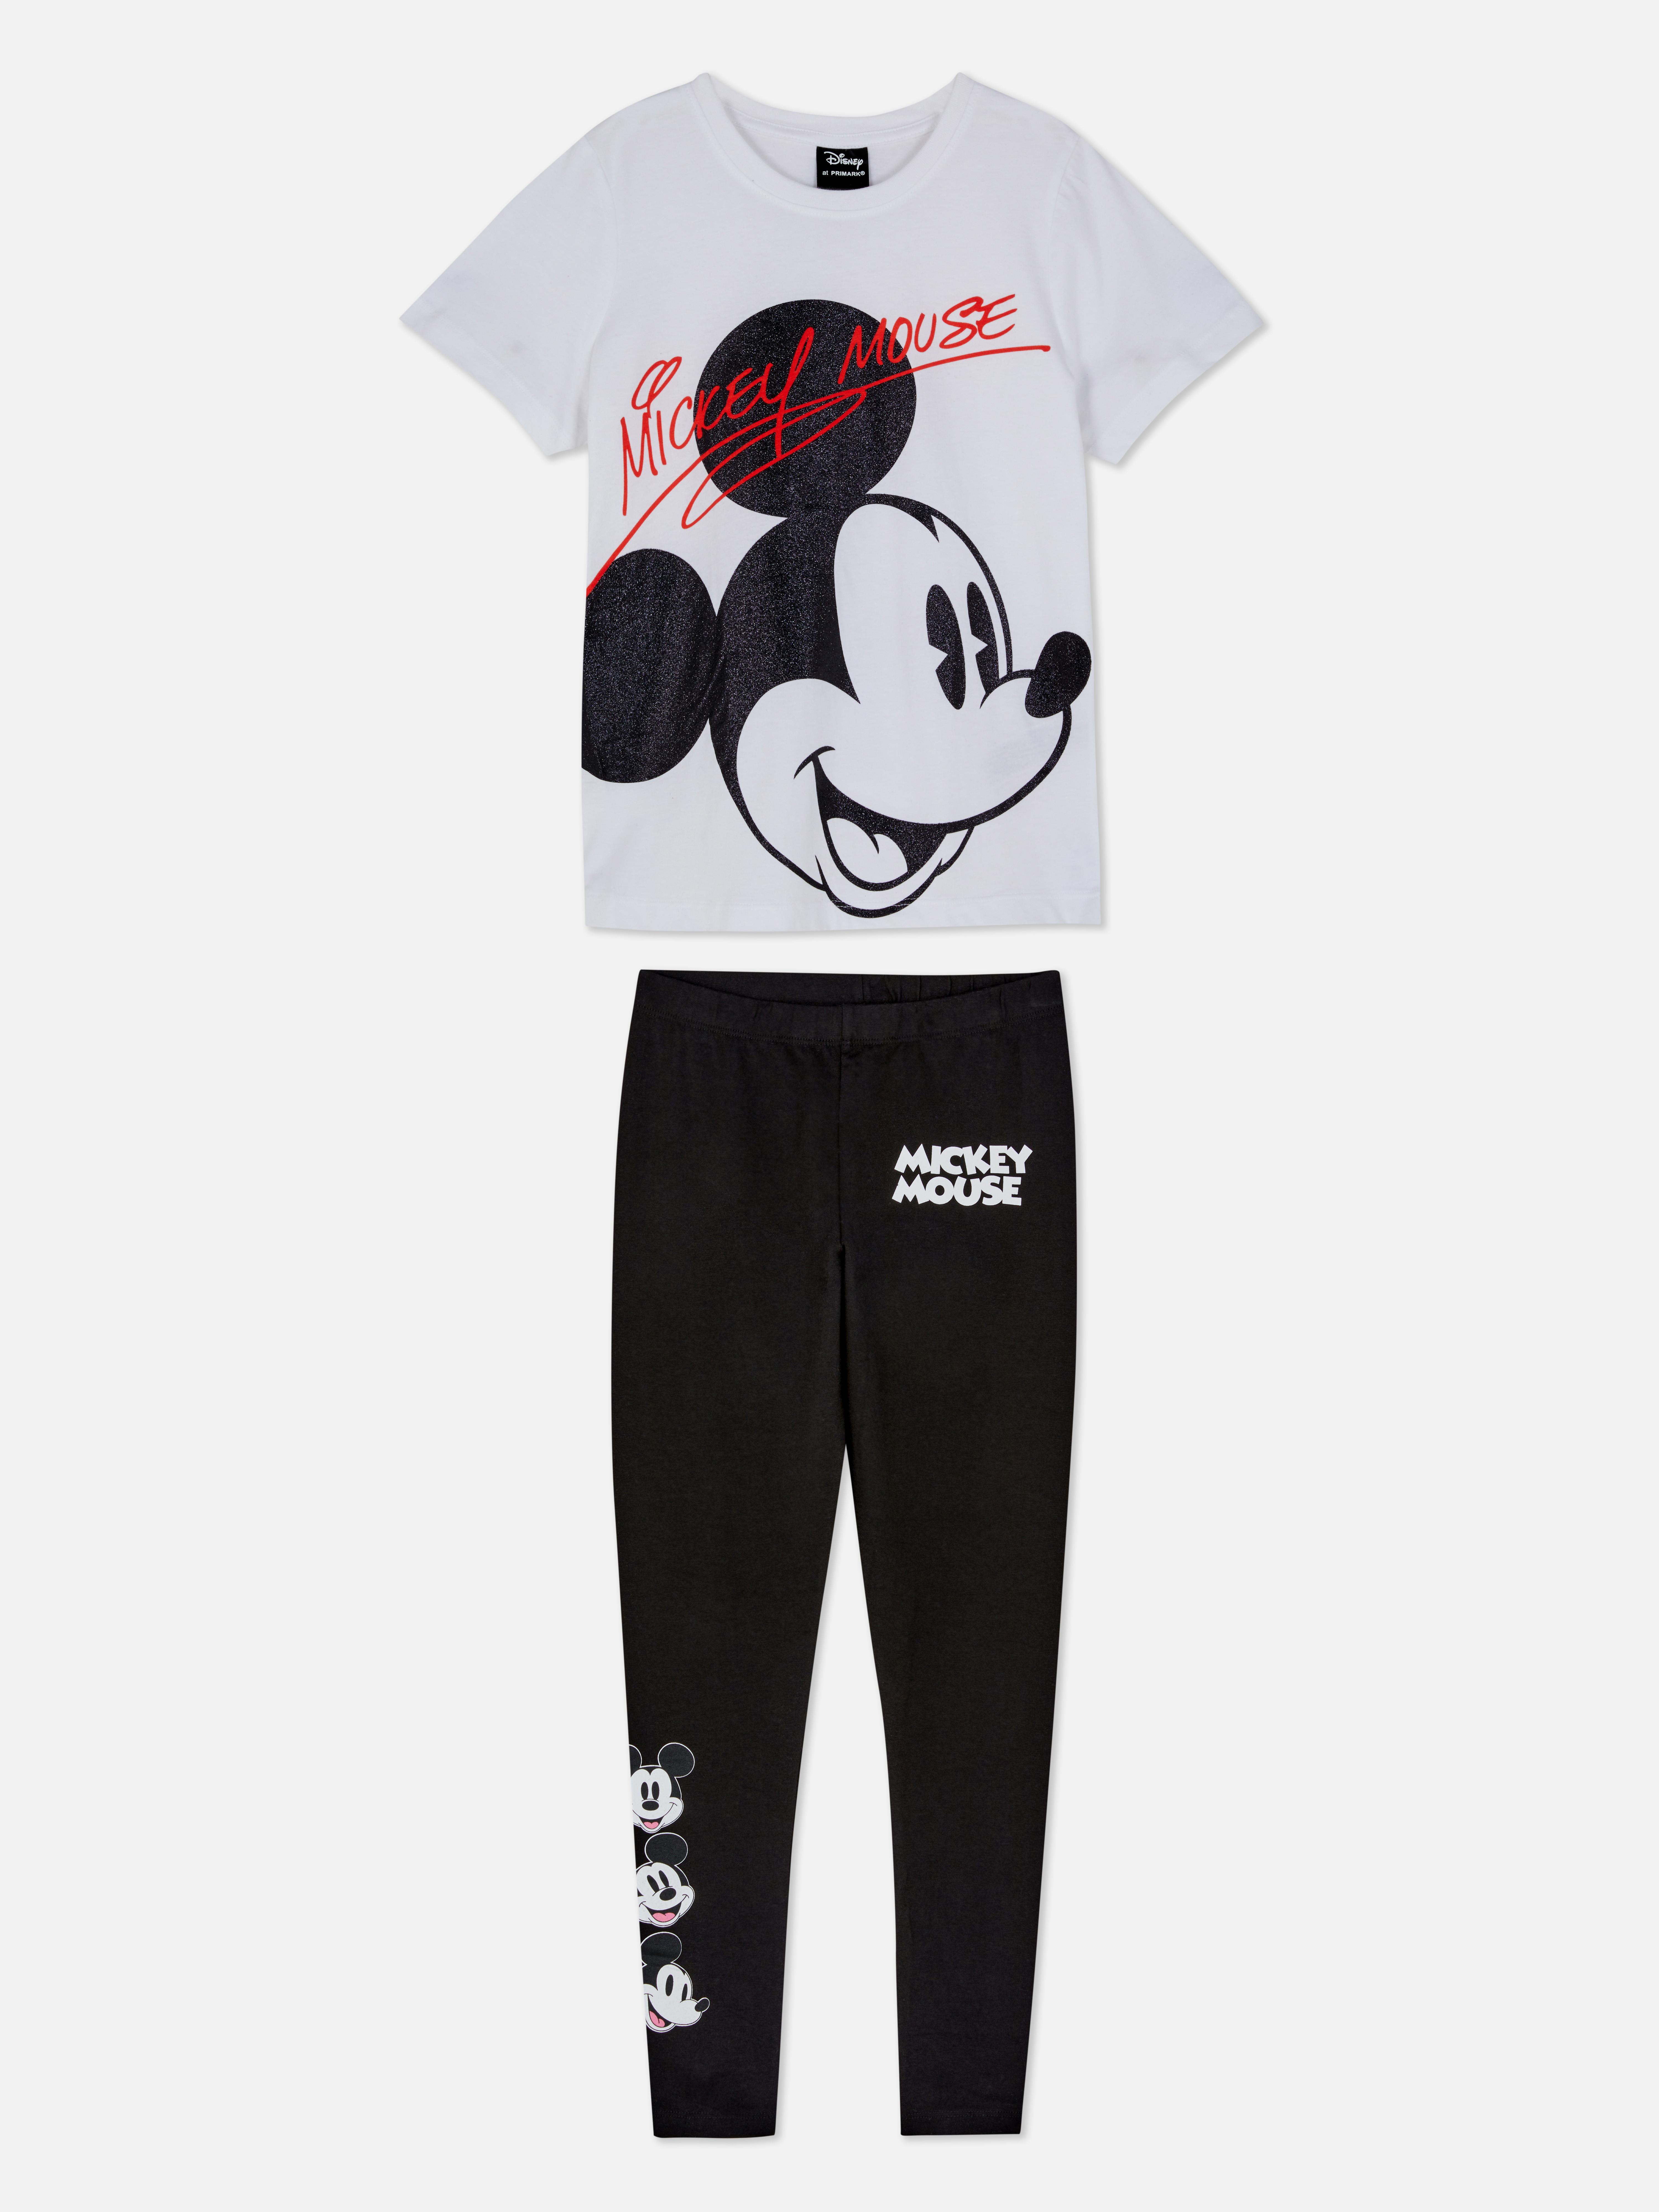 Disney’s Mickey Mouse Top and Leggings Set